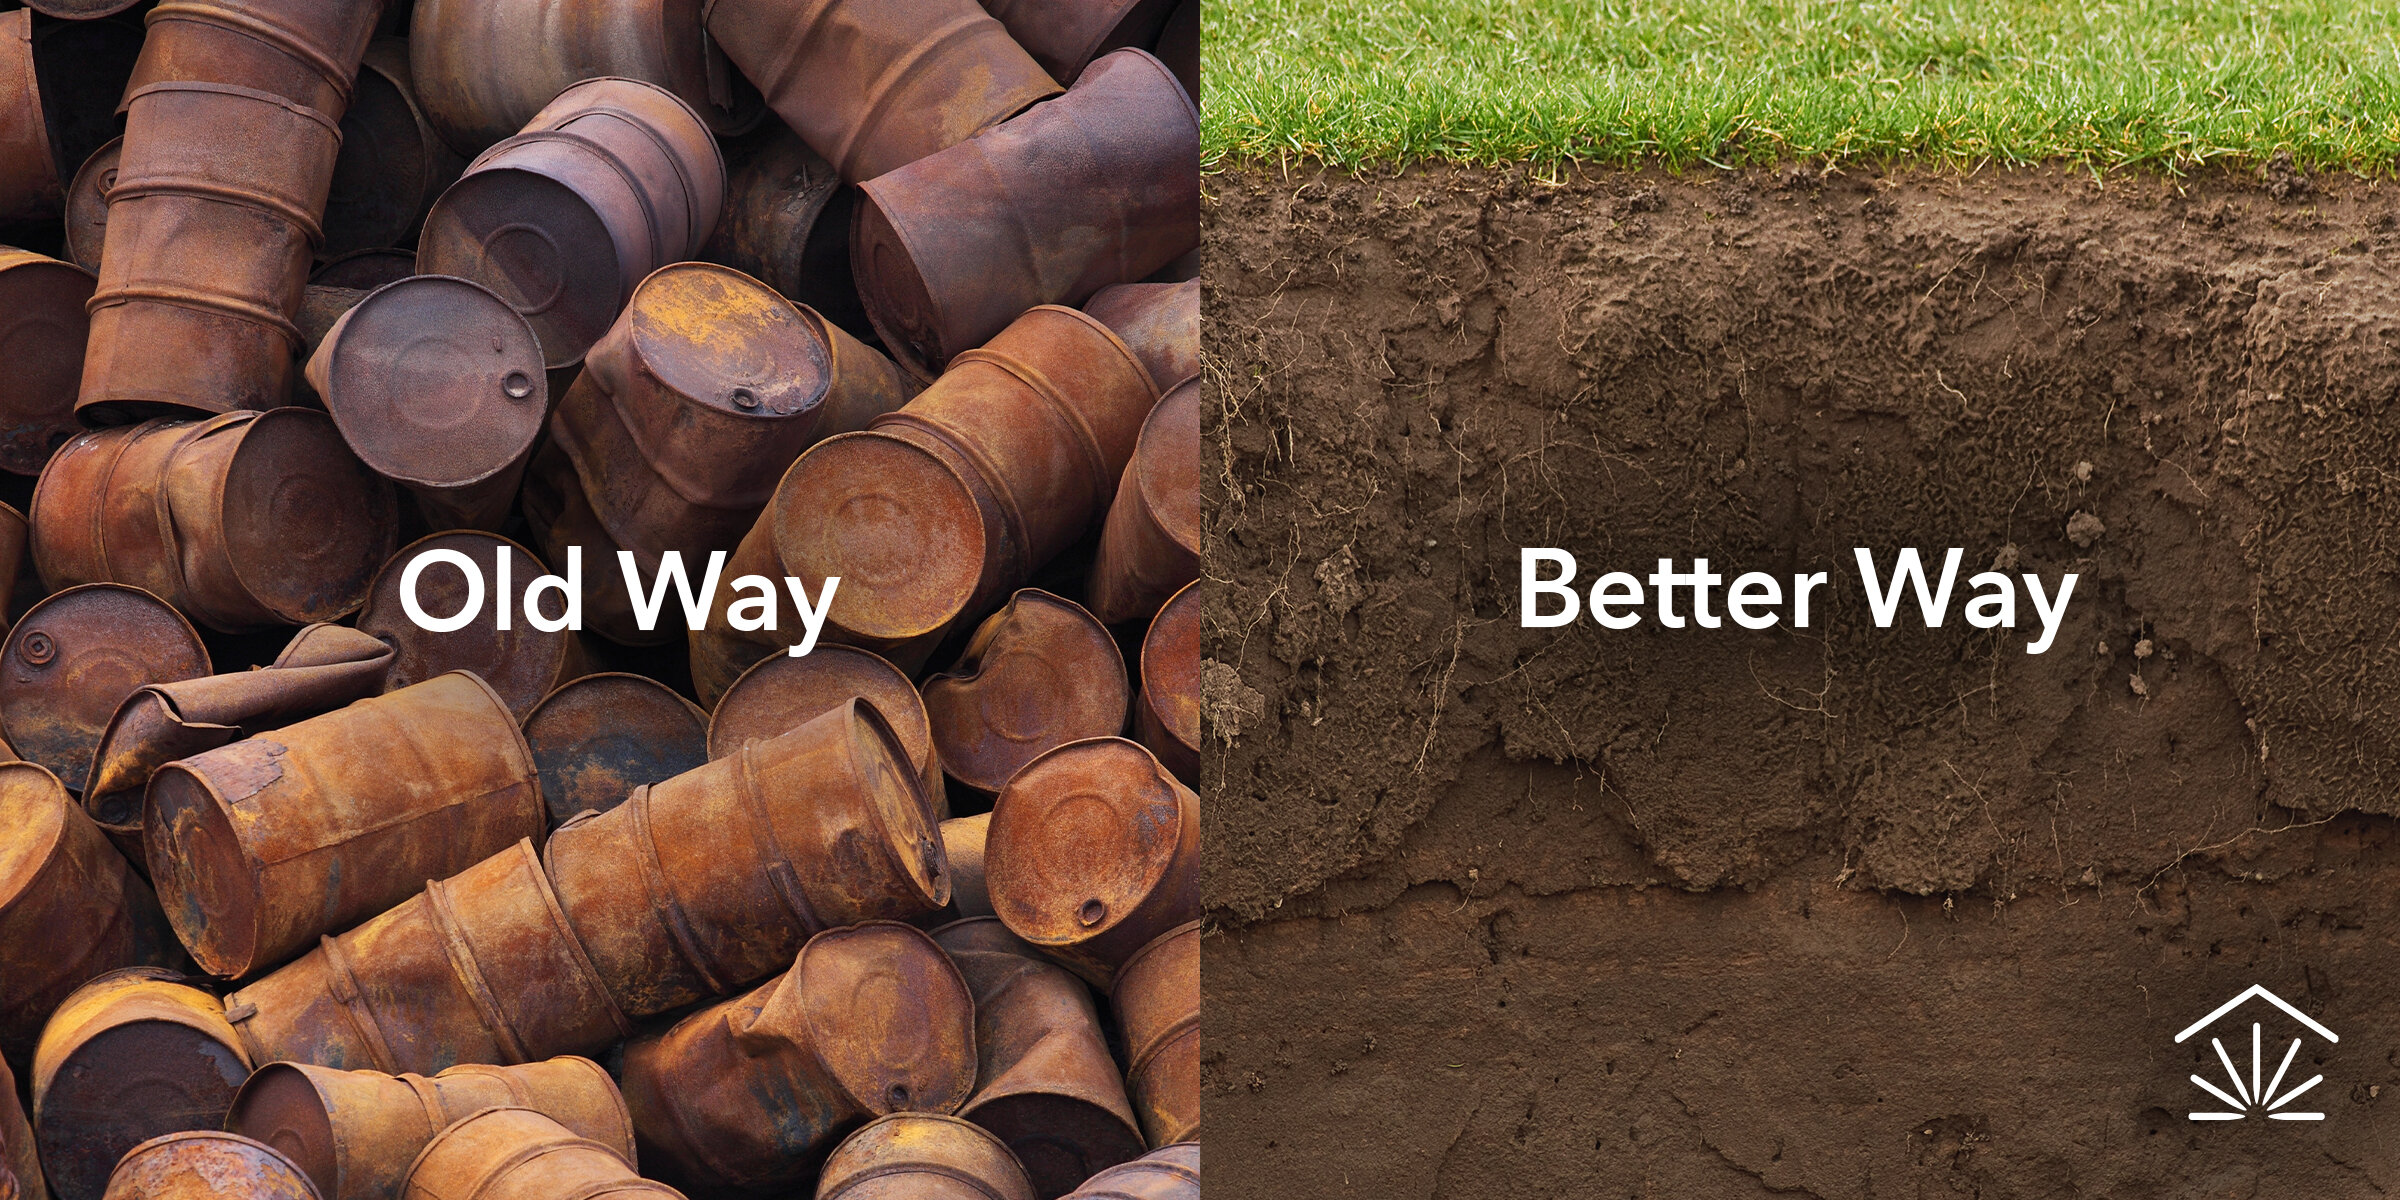 A side by side ad of a pile of oil drums, labeled 'Old Way' and a cross section of the earth labeled 'Better way'.